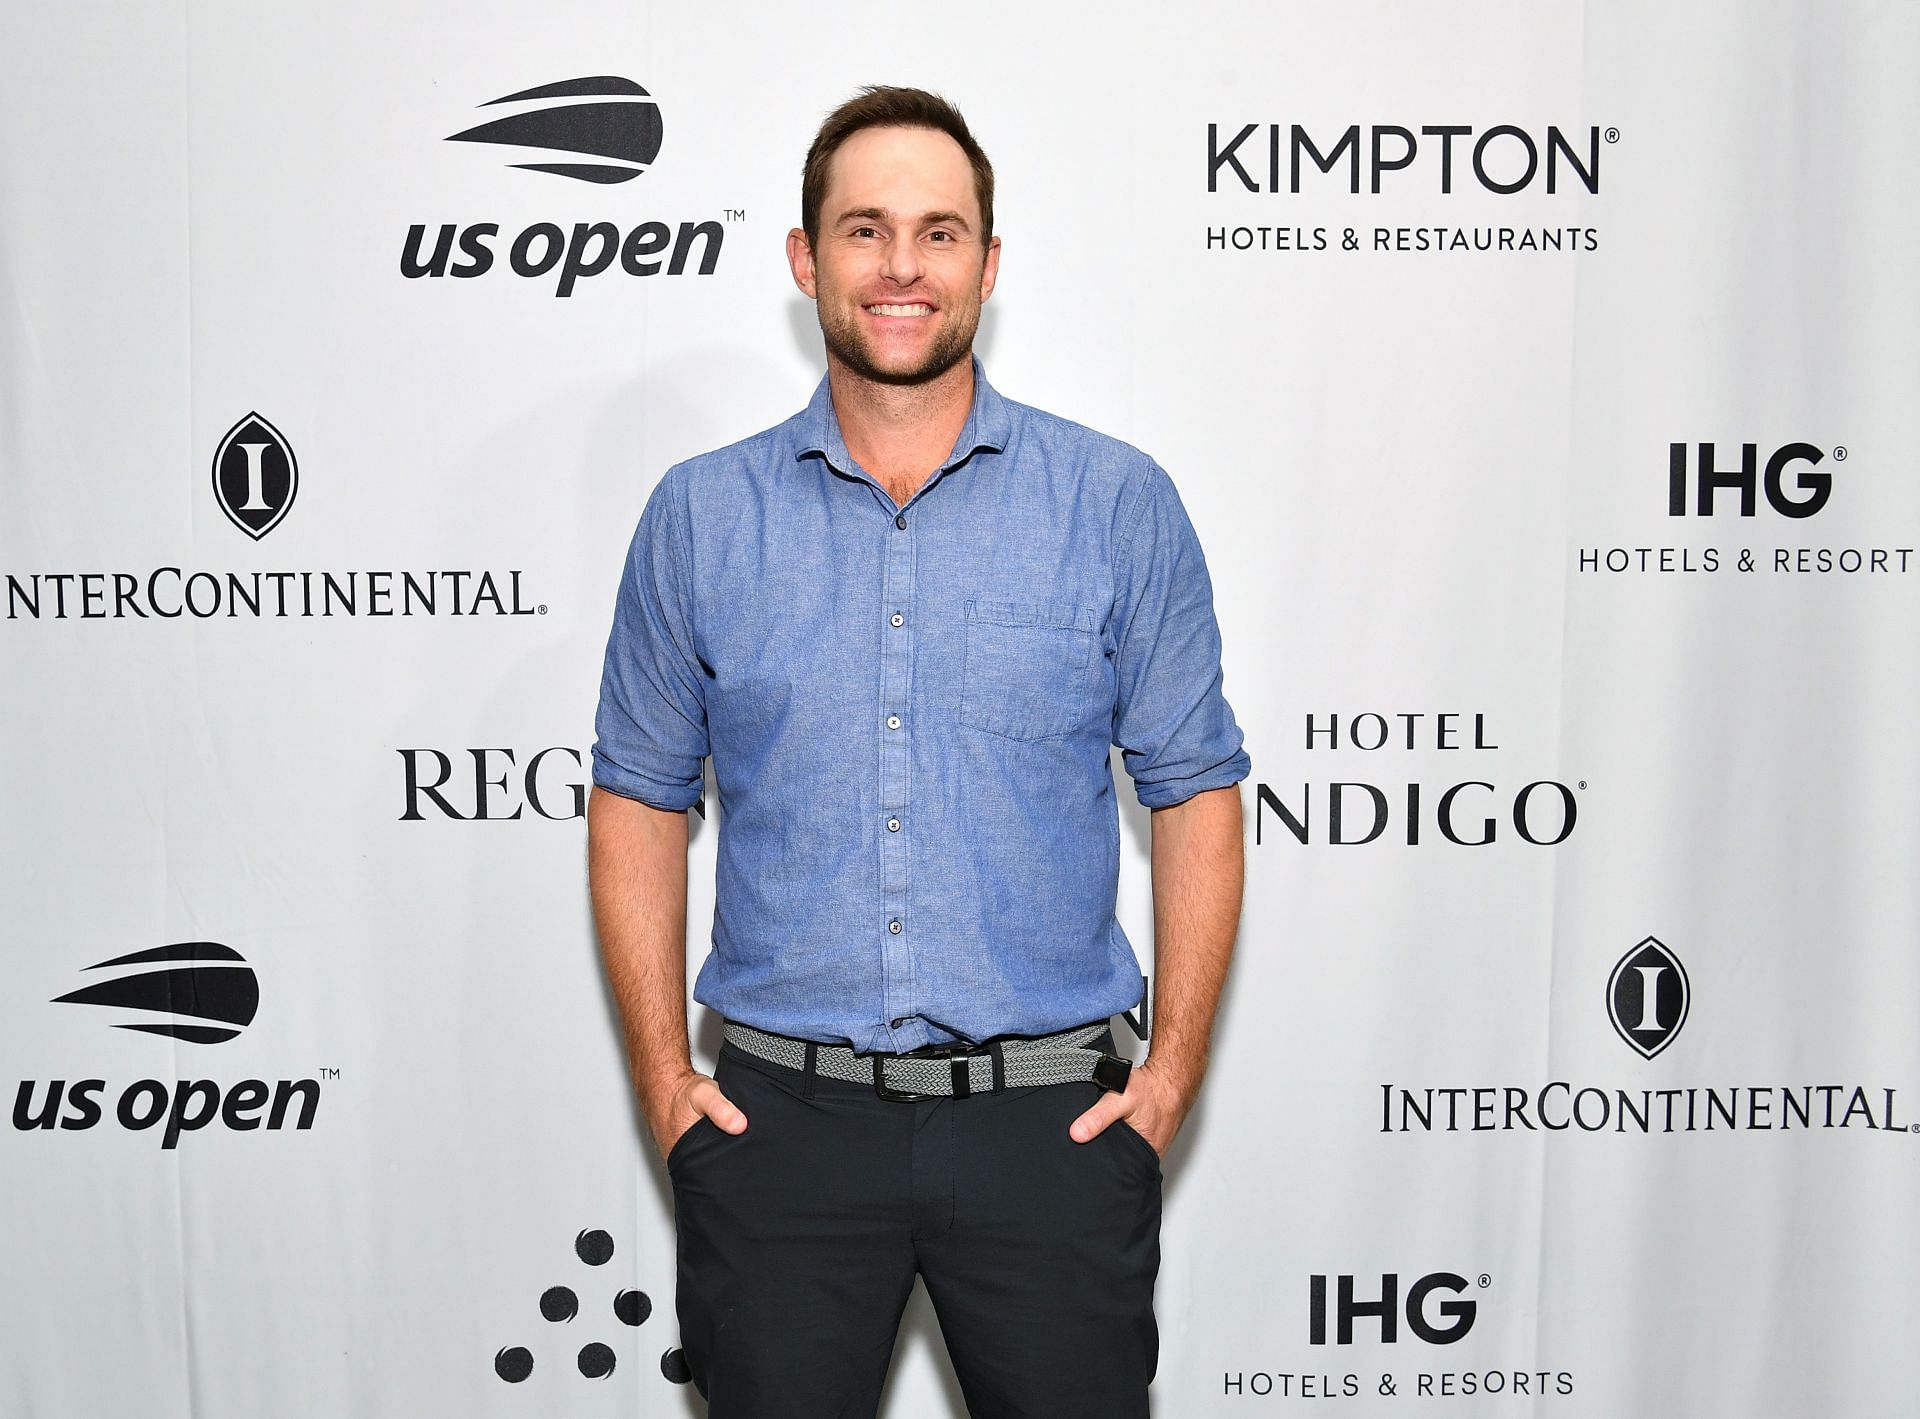 Andy Roddick, Monica Puig And Leon Bridges Excite The Crowd With An Epic Table Tennis Match And Performance During The IHG Hotels &amp; Resorts &quot;Legends, Unmatched&quot; Event At Kimpton Hotel Eventi